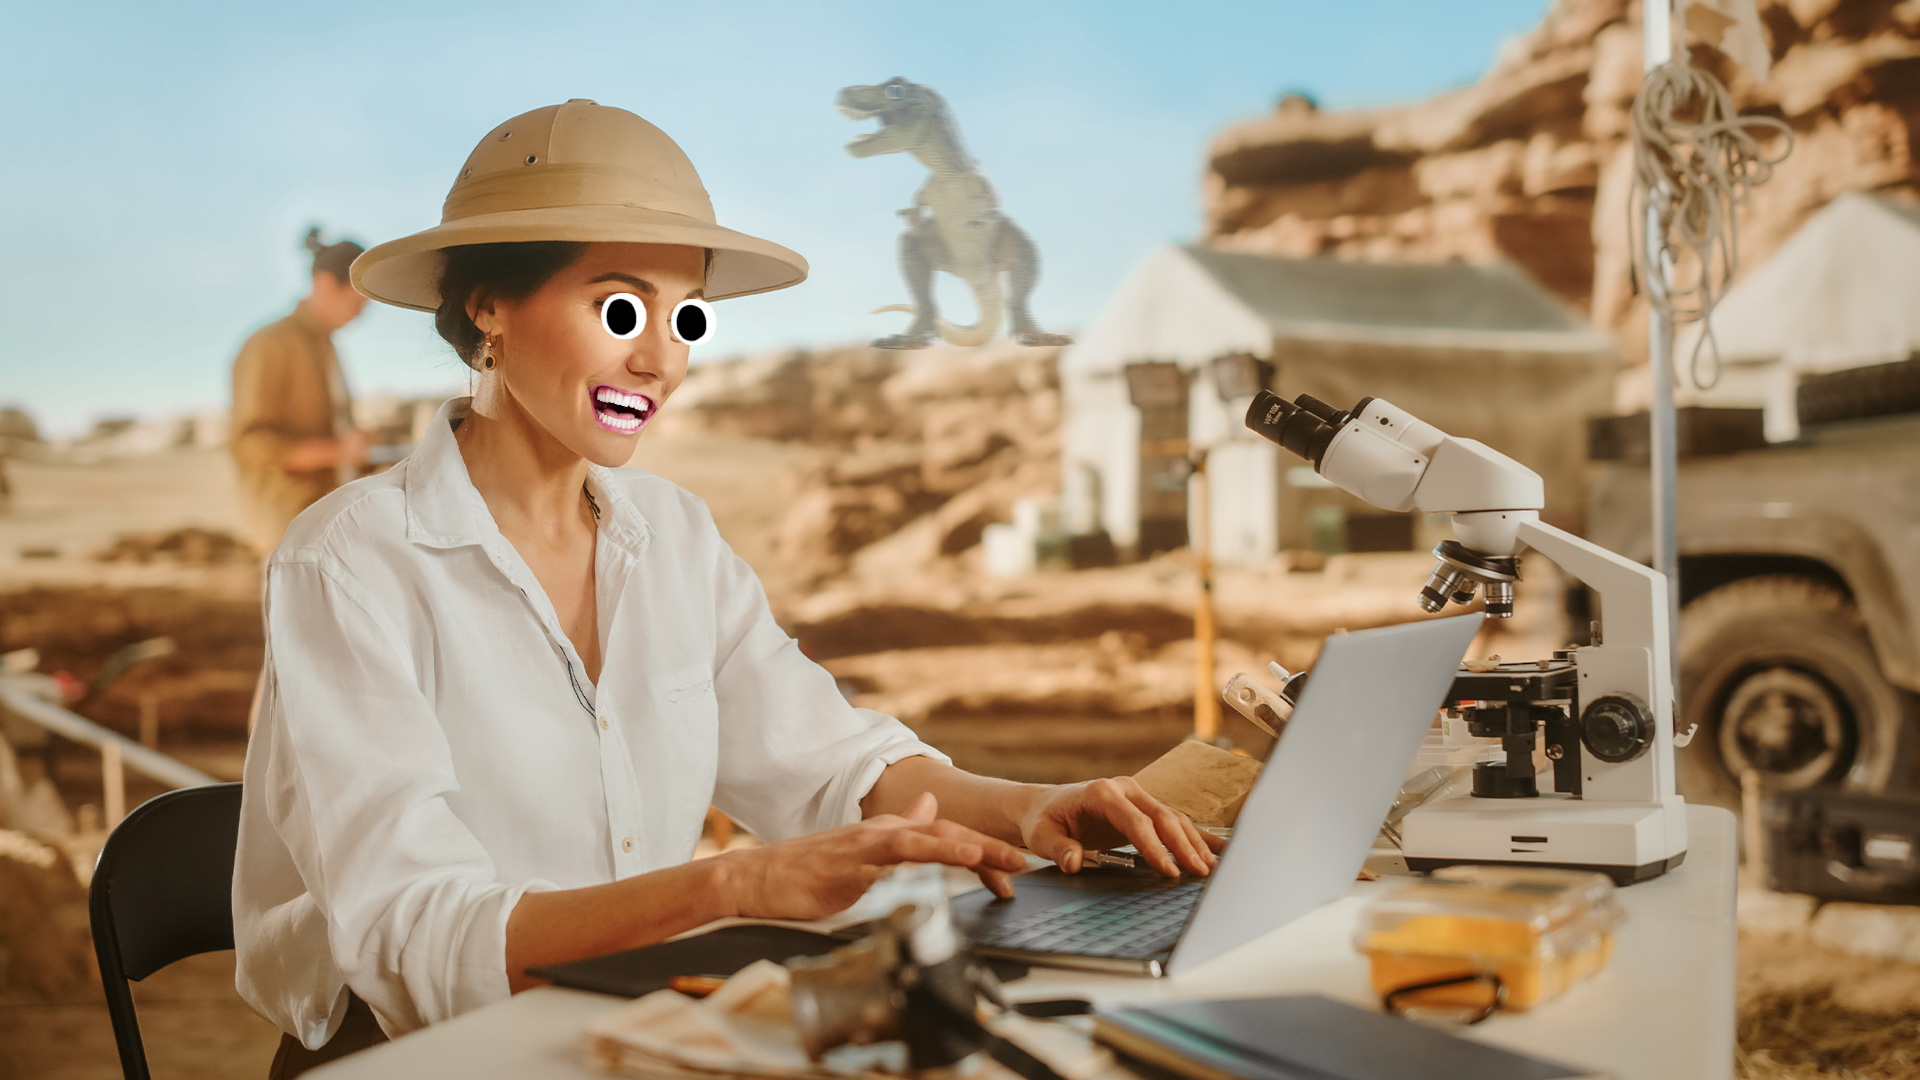 A woman researches something on a laptop at an archaeological dig